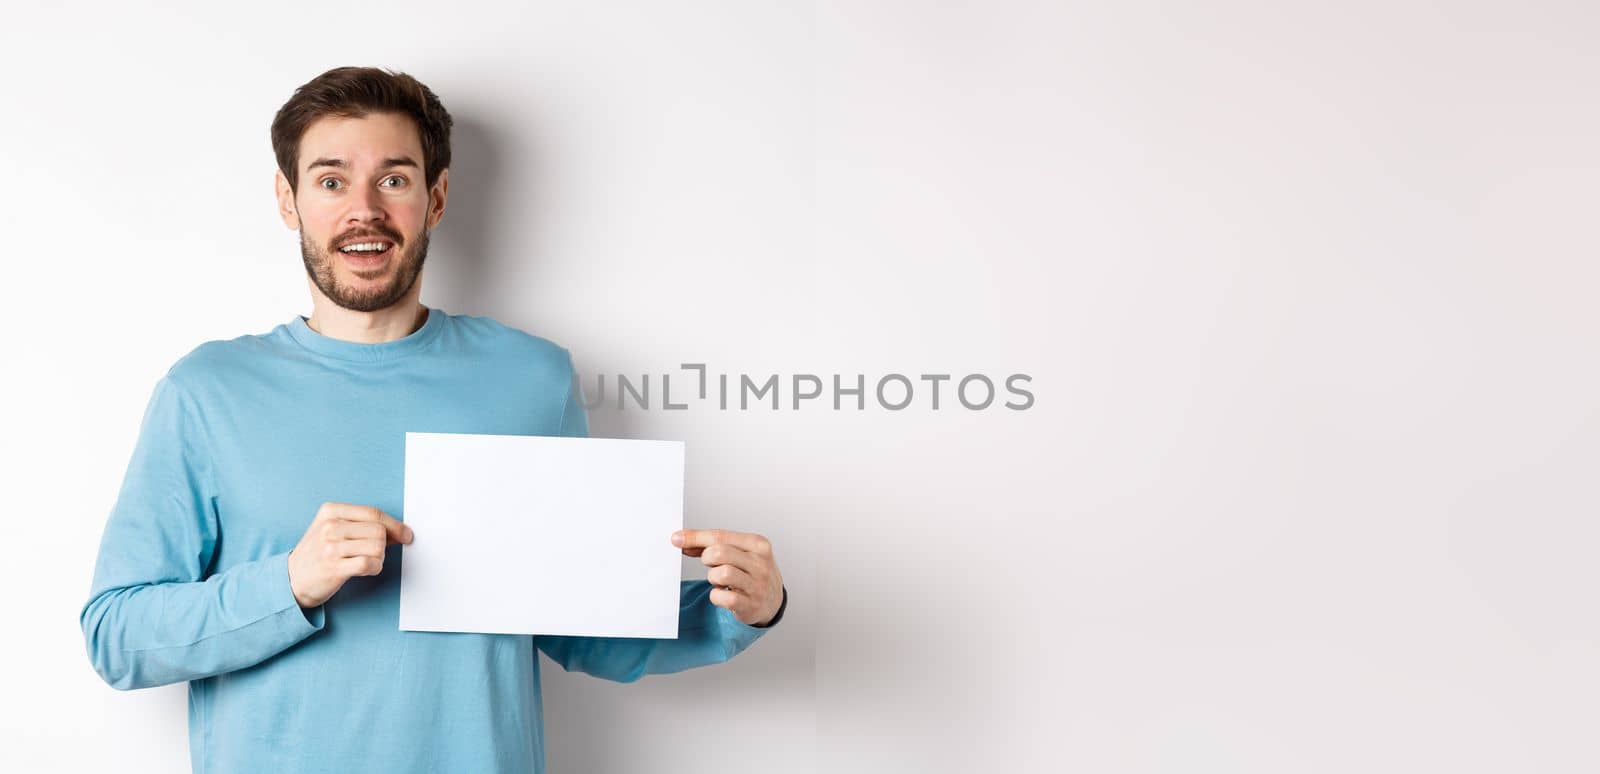 Romantic man looking with hopeful face at camera, showing sign card, blank piece of paper for banner or logo, standing over white background.